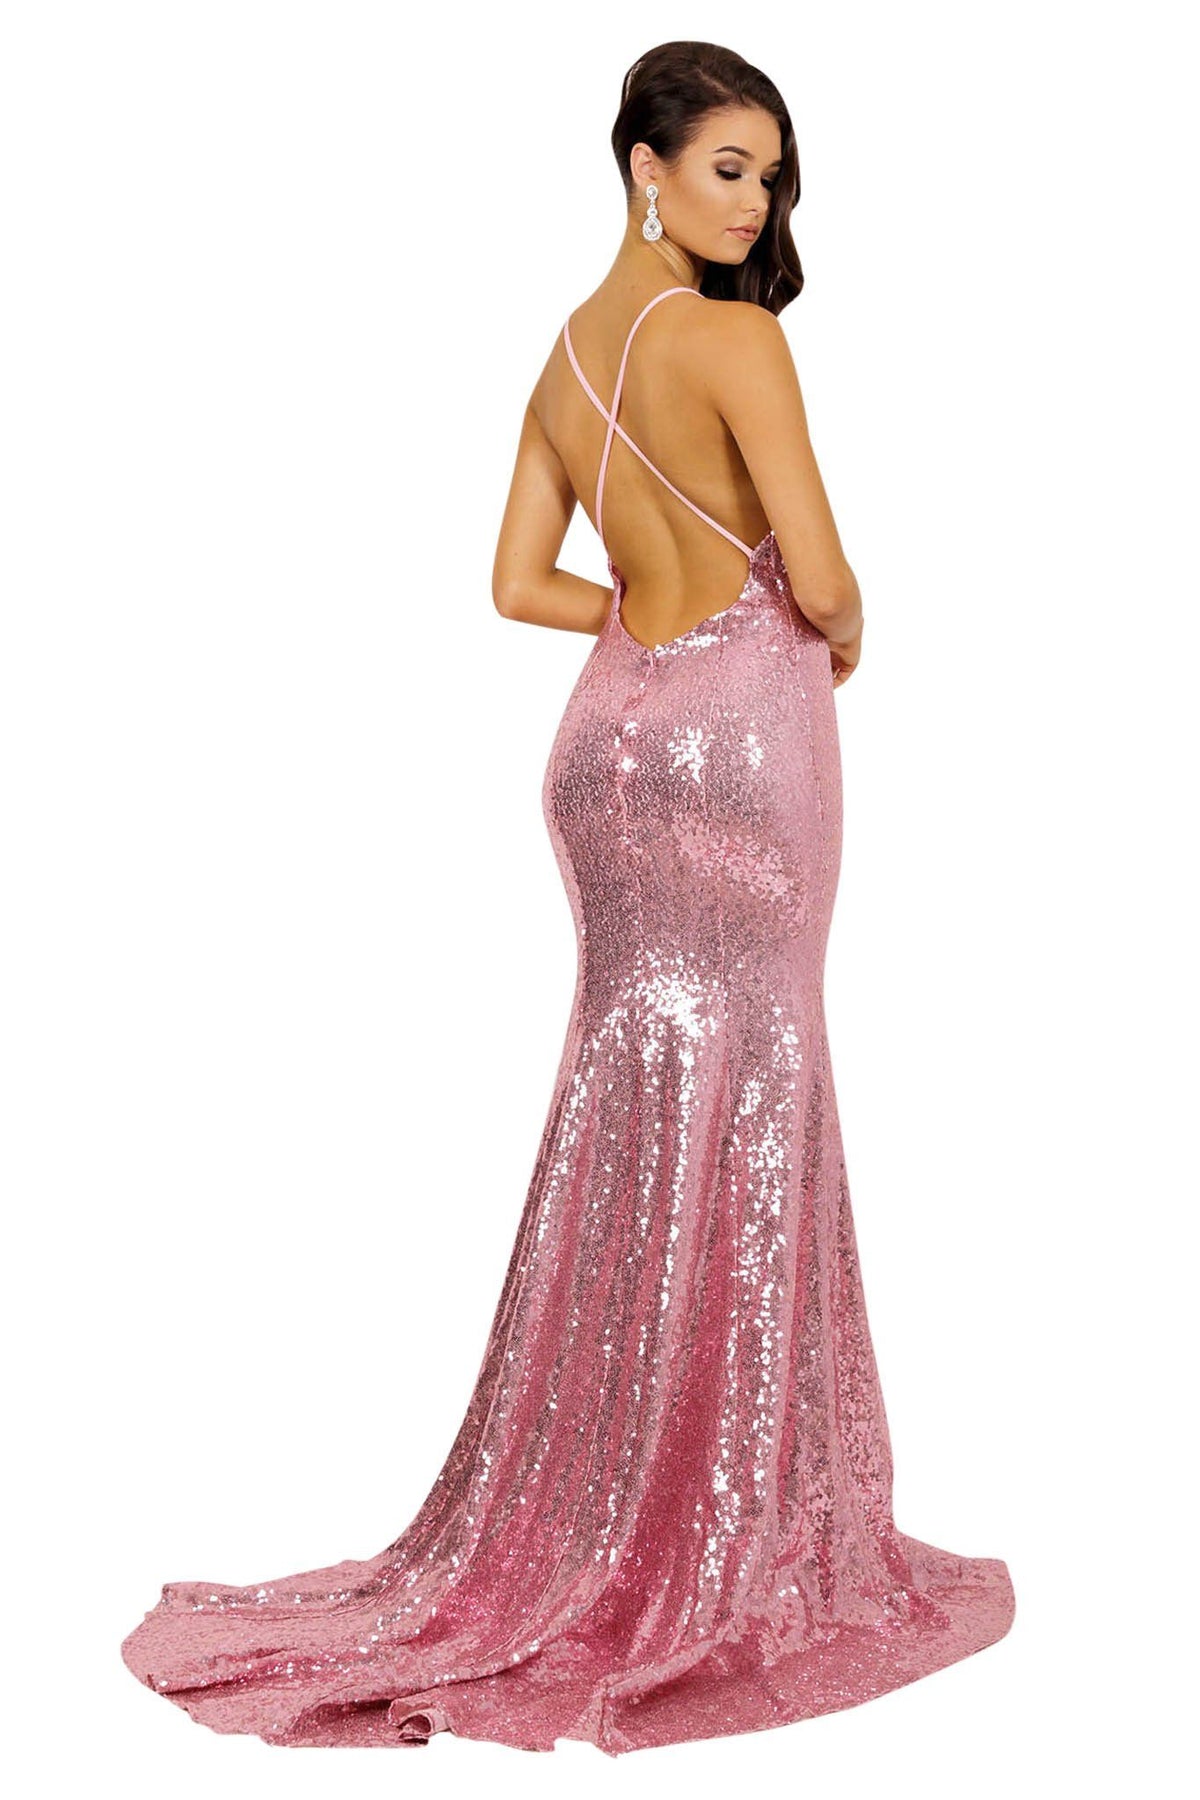 Crisscross straps on open back design of bright hot pink sequin sleeveless long evening gown with deep V neckline, crisscross back straps, V open back, and long train